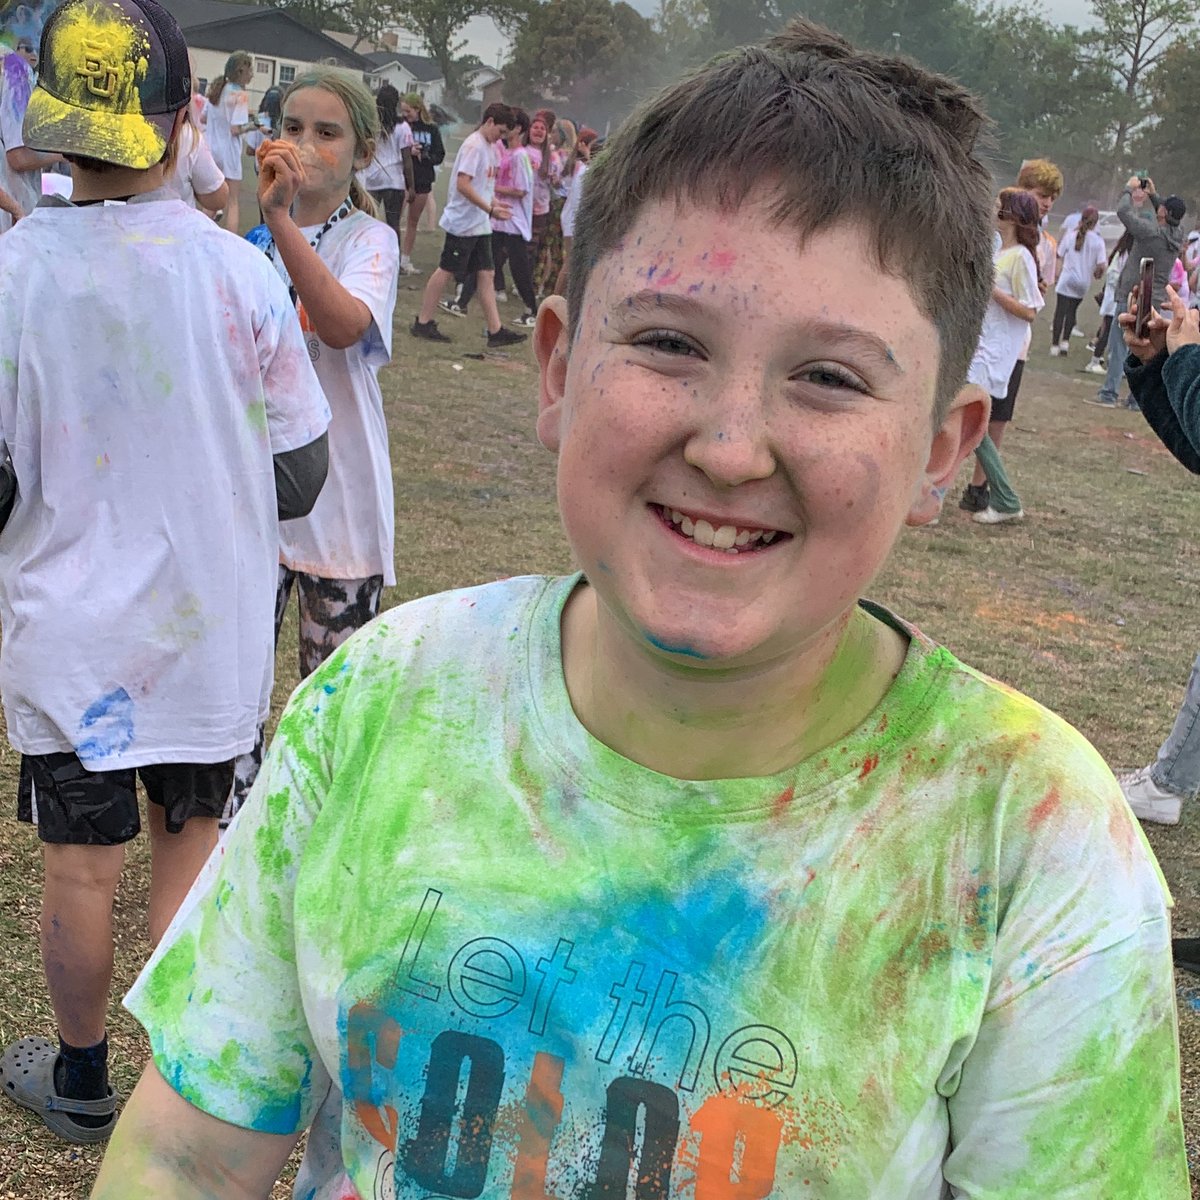 Thank you STEAM friends and family for all the support. The students had so much fun at the color battle! Don't you wish you were in the middle of that??💚💜🧡💙❤️